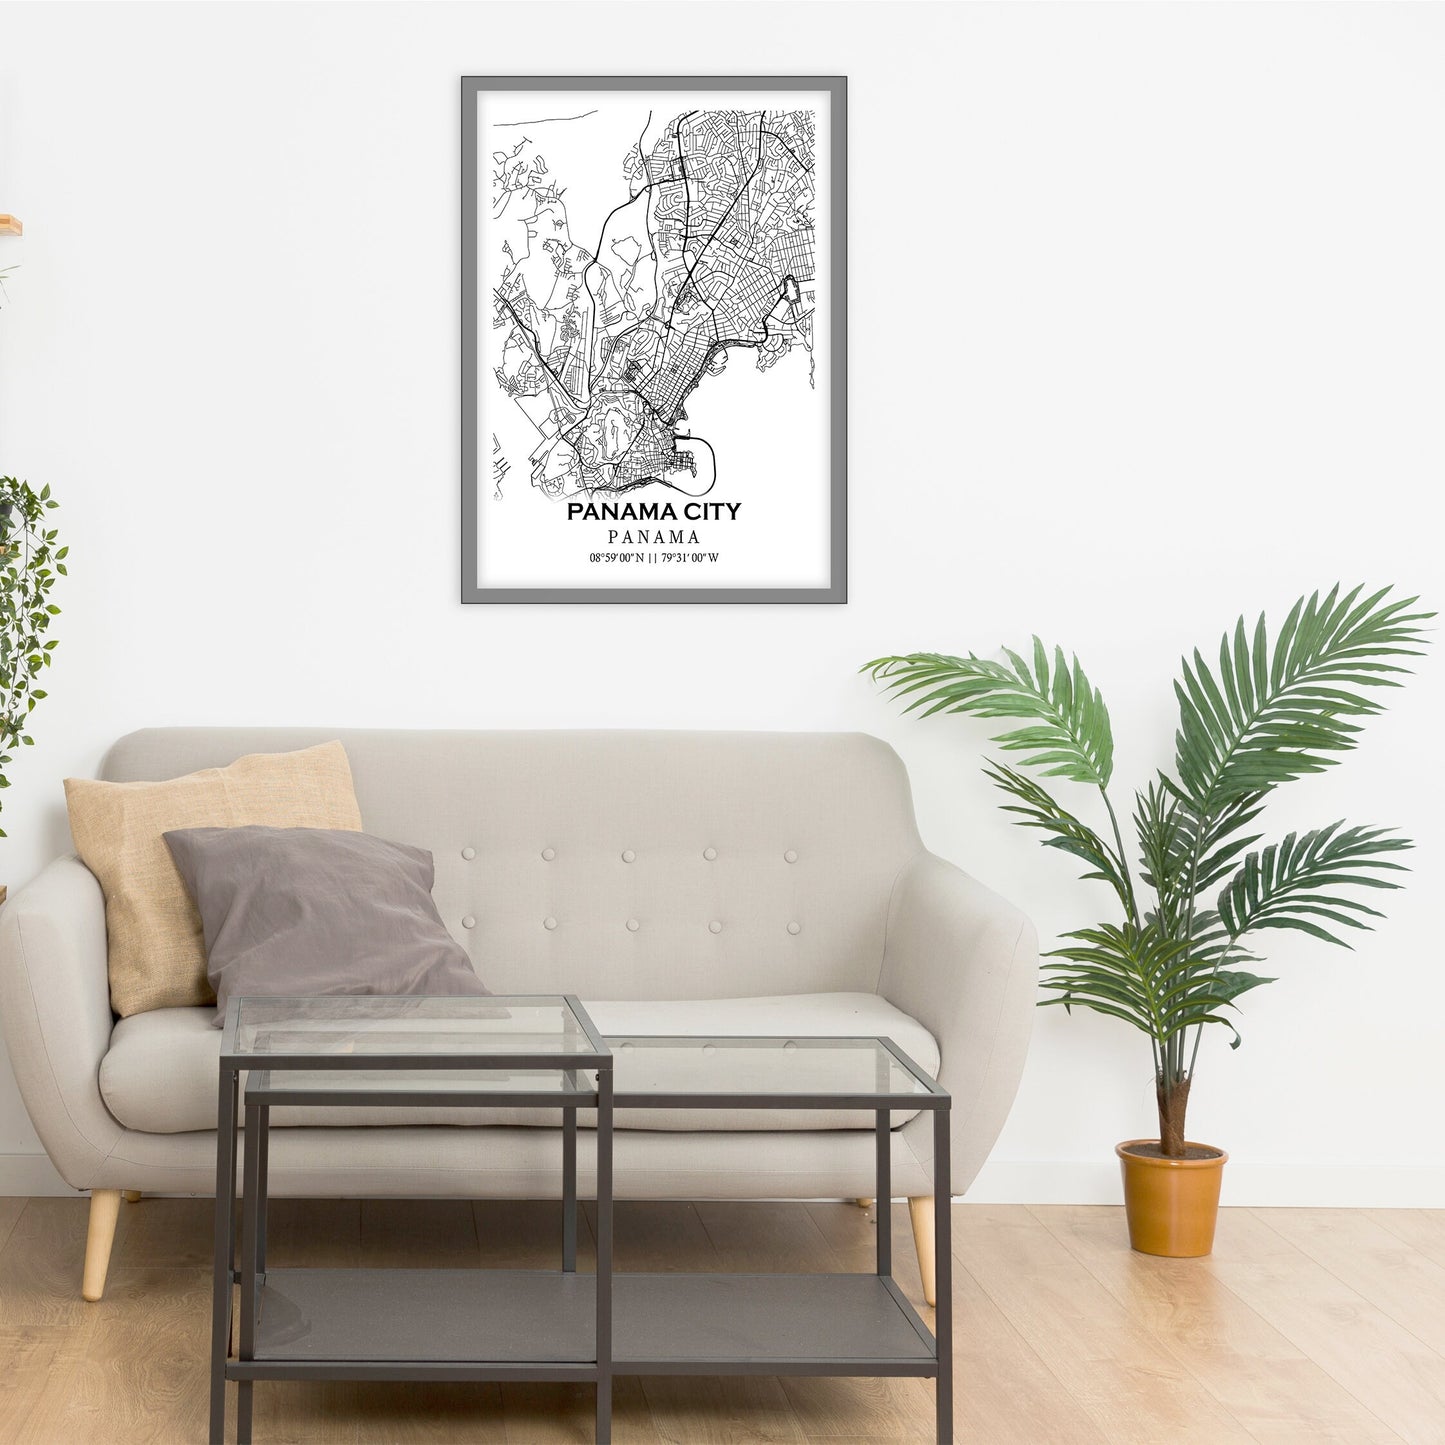 City map of PANAMA CITY - Home Decor - Wall decor - Office map - Travel map - Print map - Poster city map - Panama City map -Map art -Panama